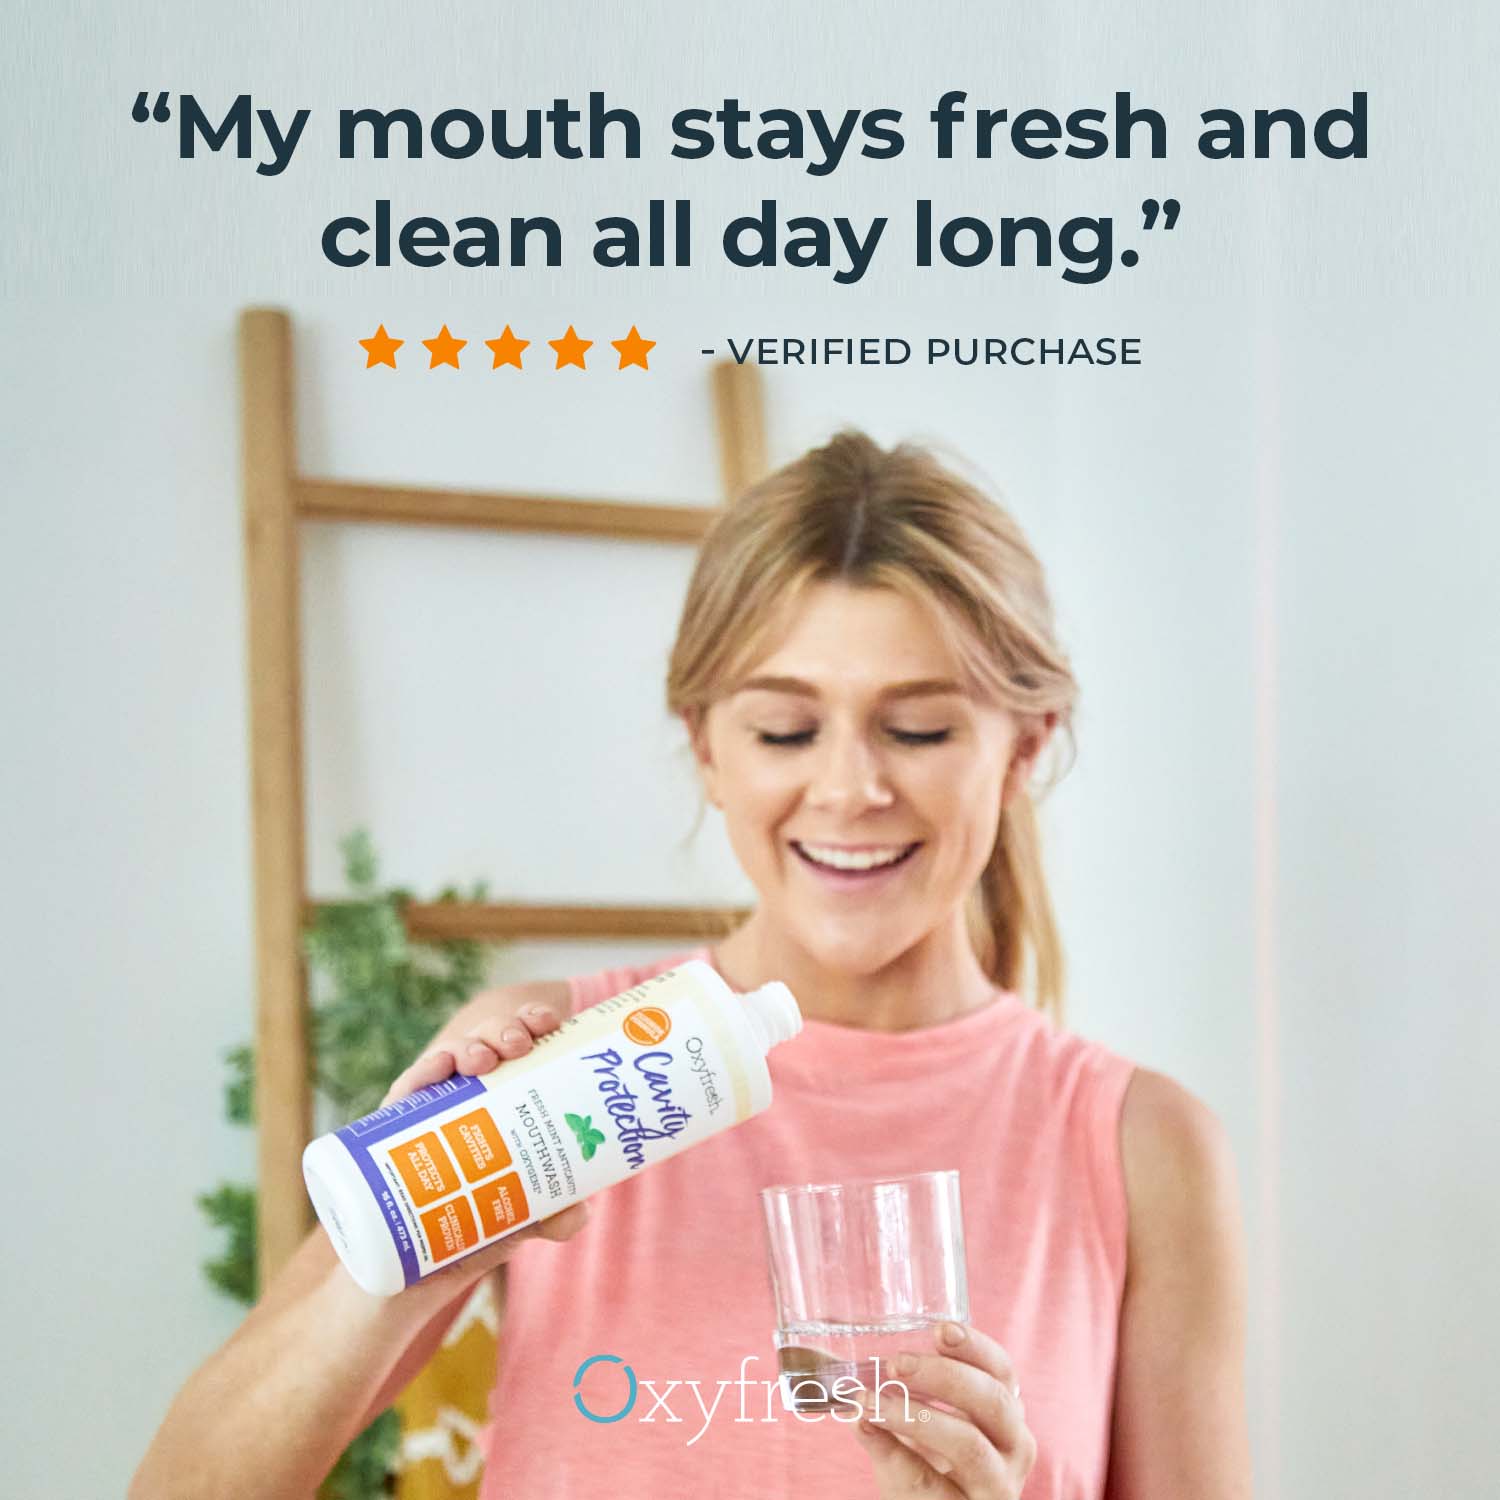 oxyfresh-cavity-protection-fluoride-mouthwash-review-"My-mouth-stays-fresh-and-clean-all-day-long."